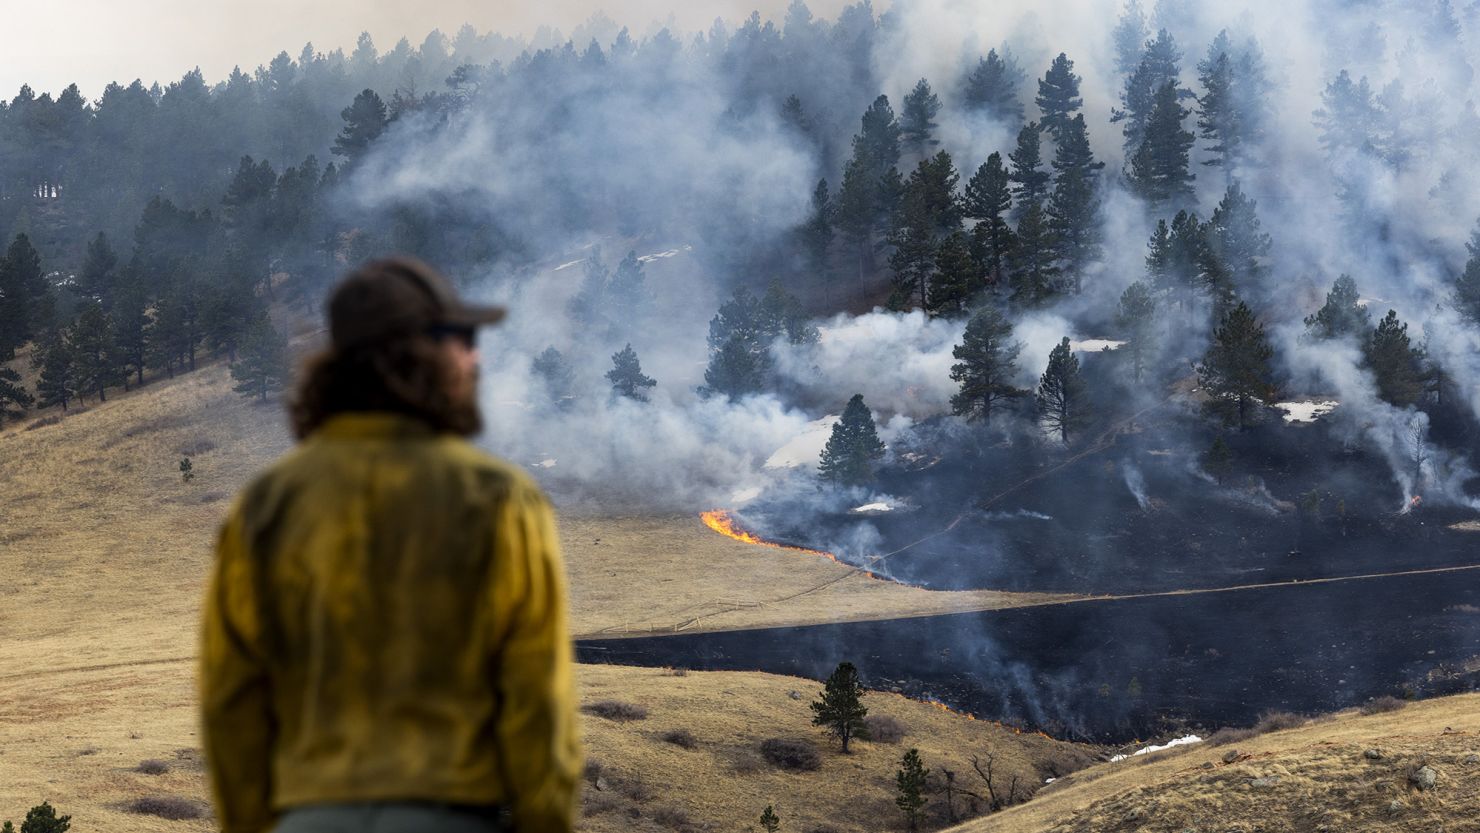 A firefighter watches as a fire burns through grass on March 26, 2022 in Boulder, Colorado.